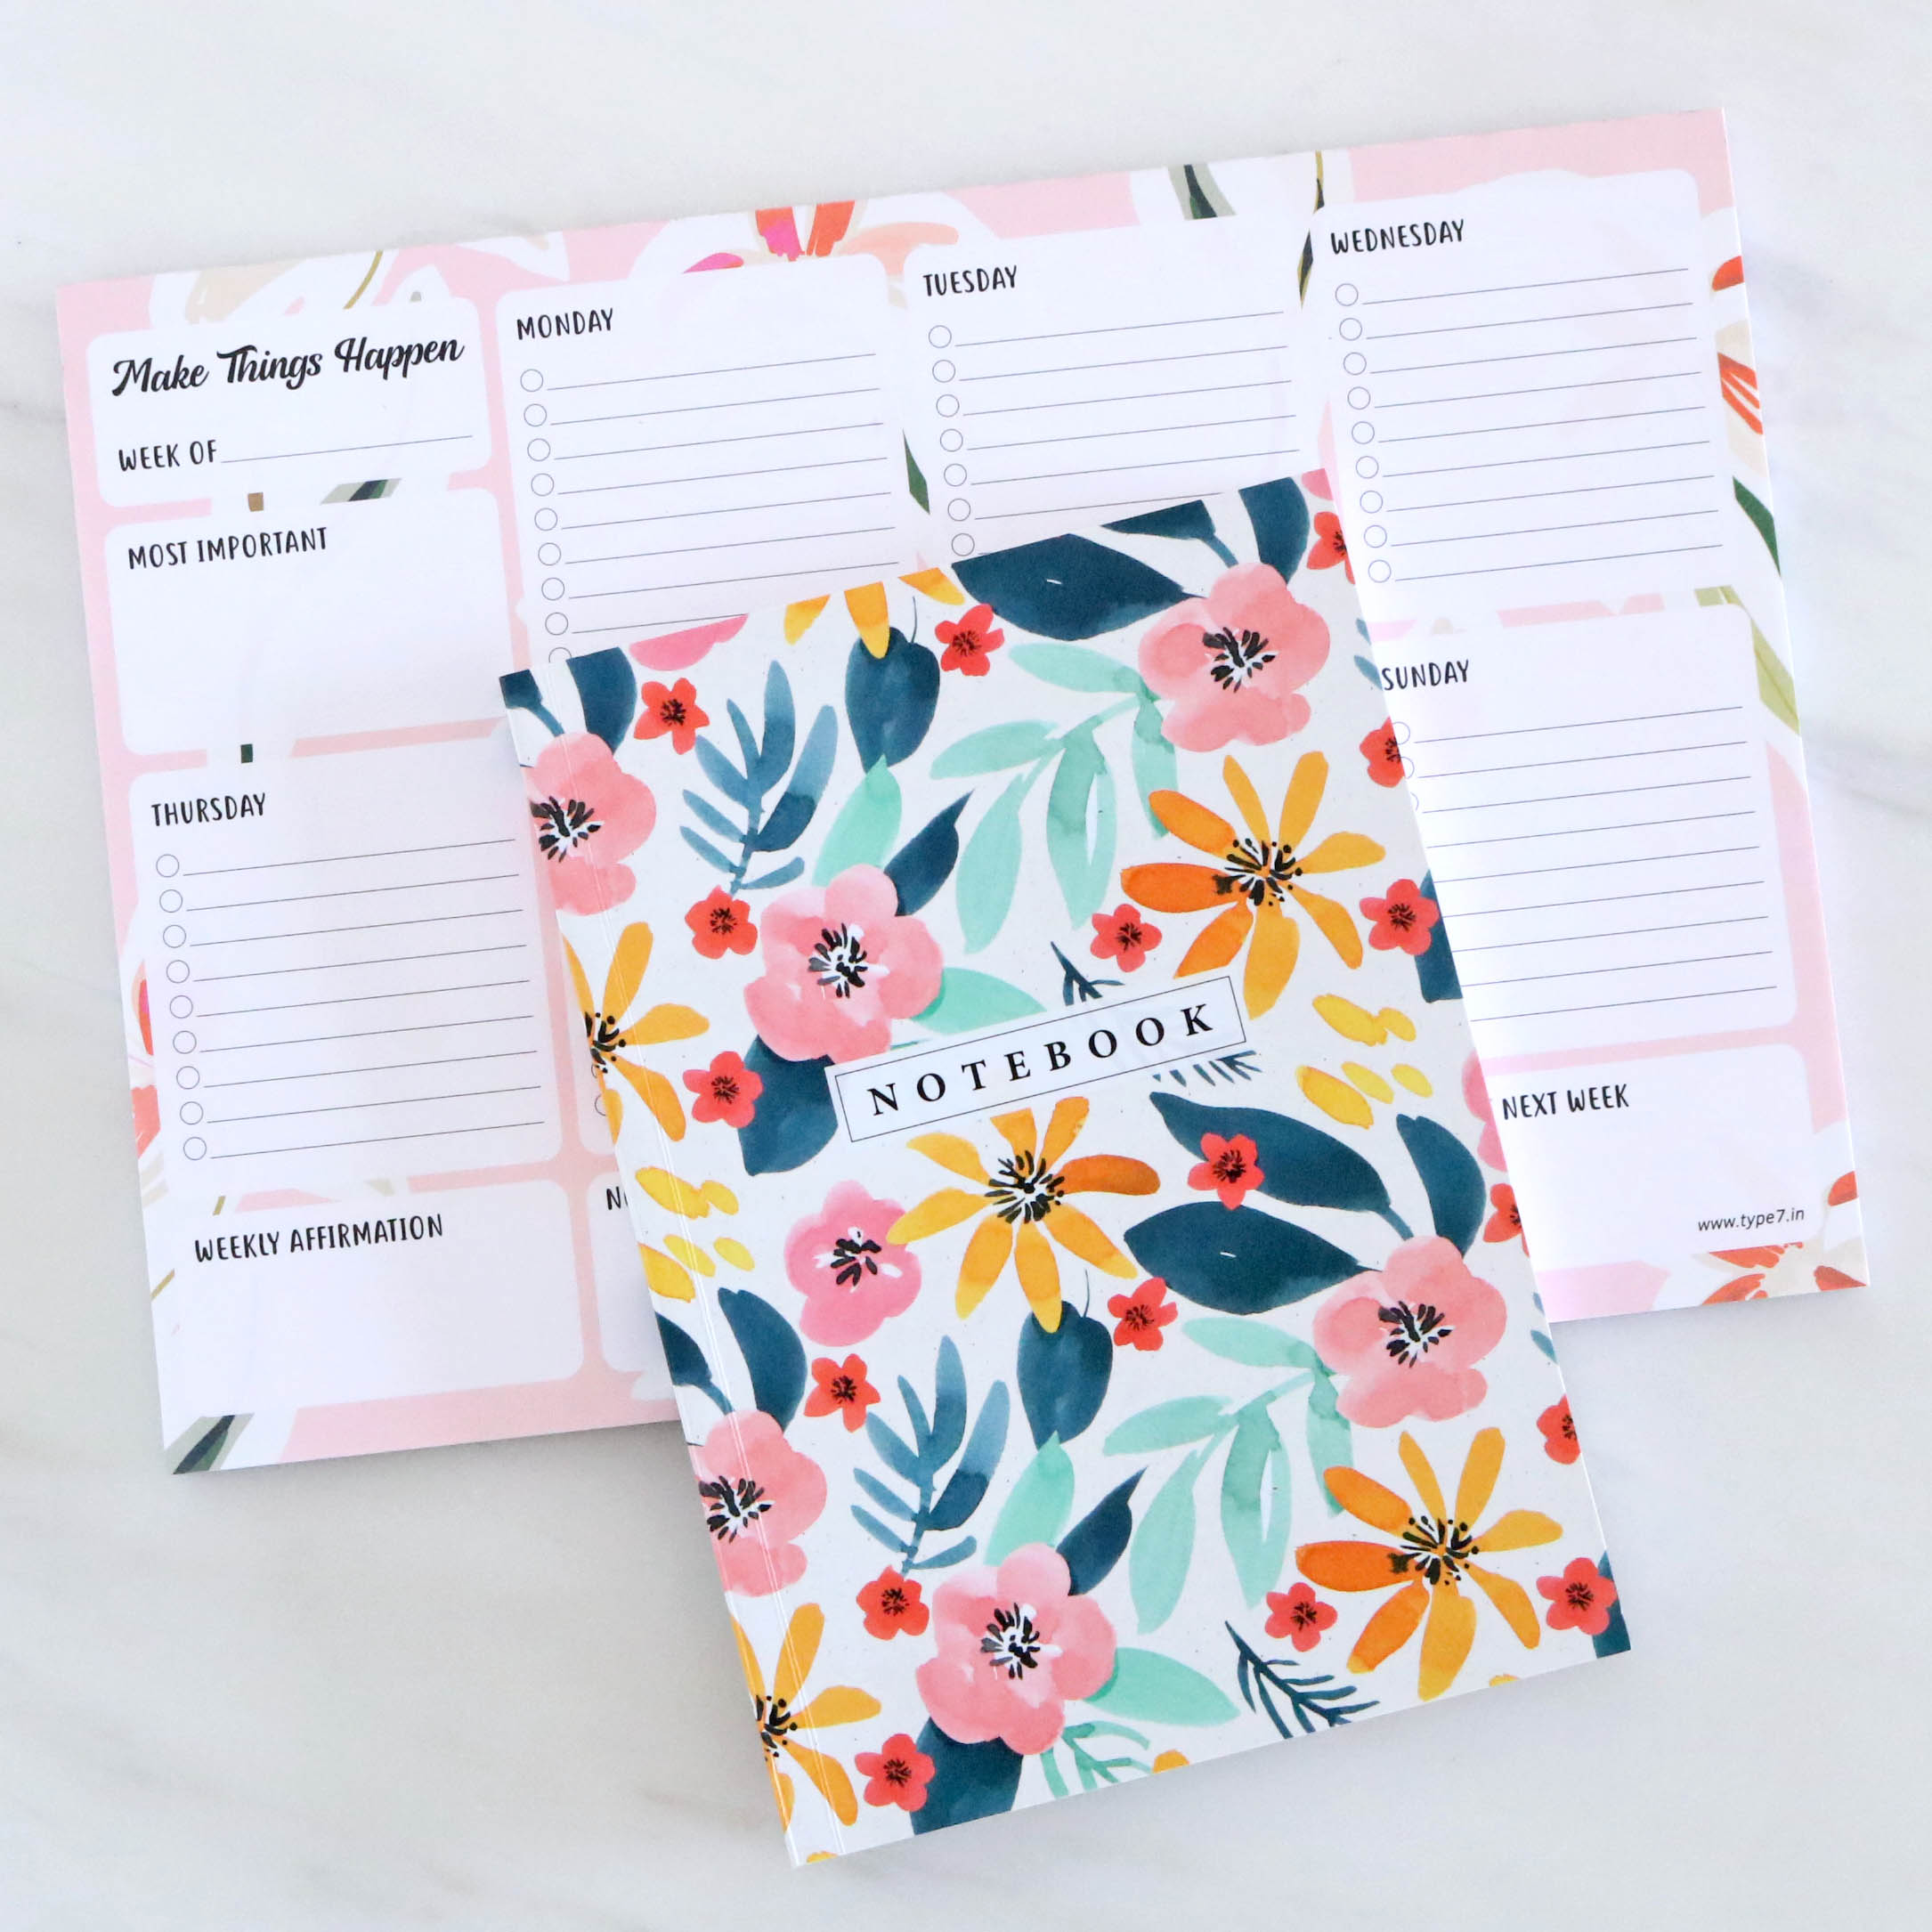 Make Things Happen & Notebook Combo